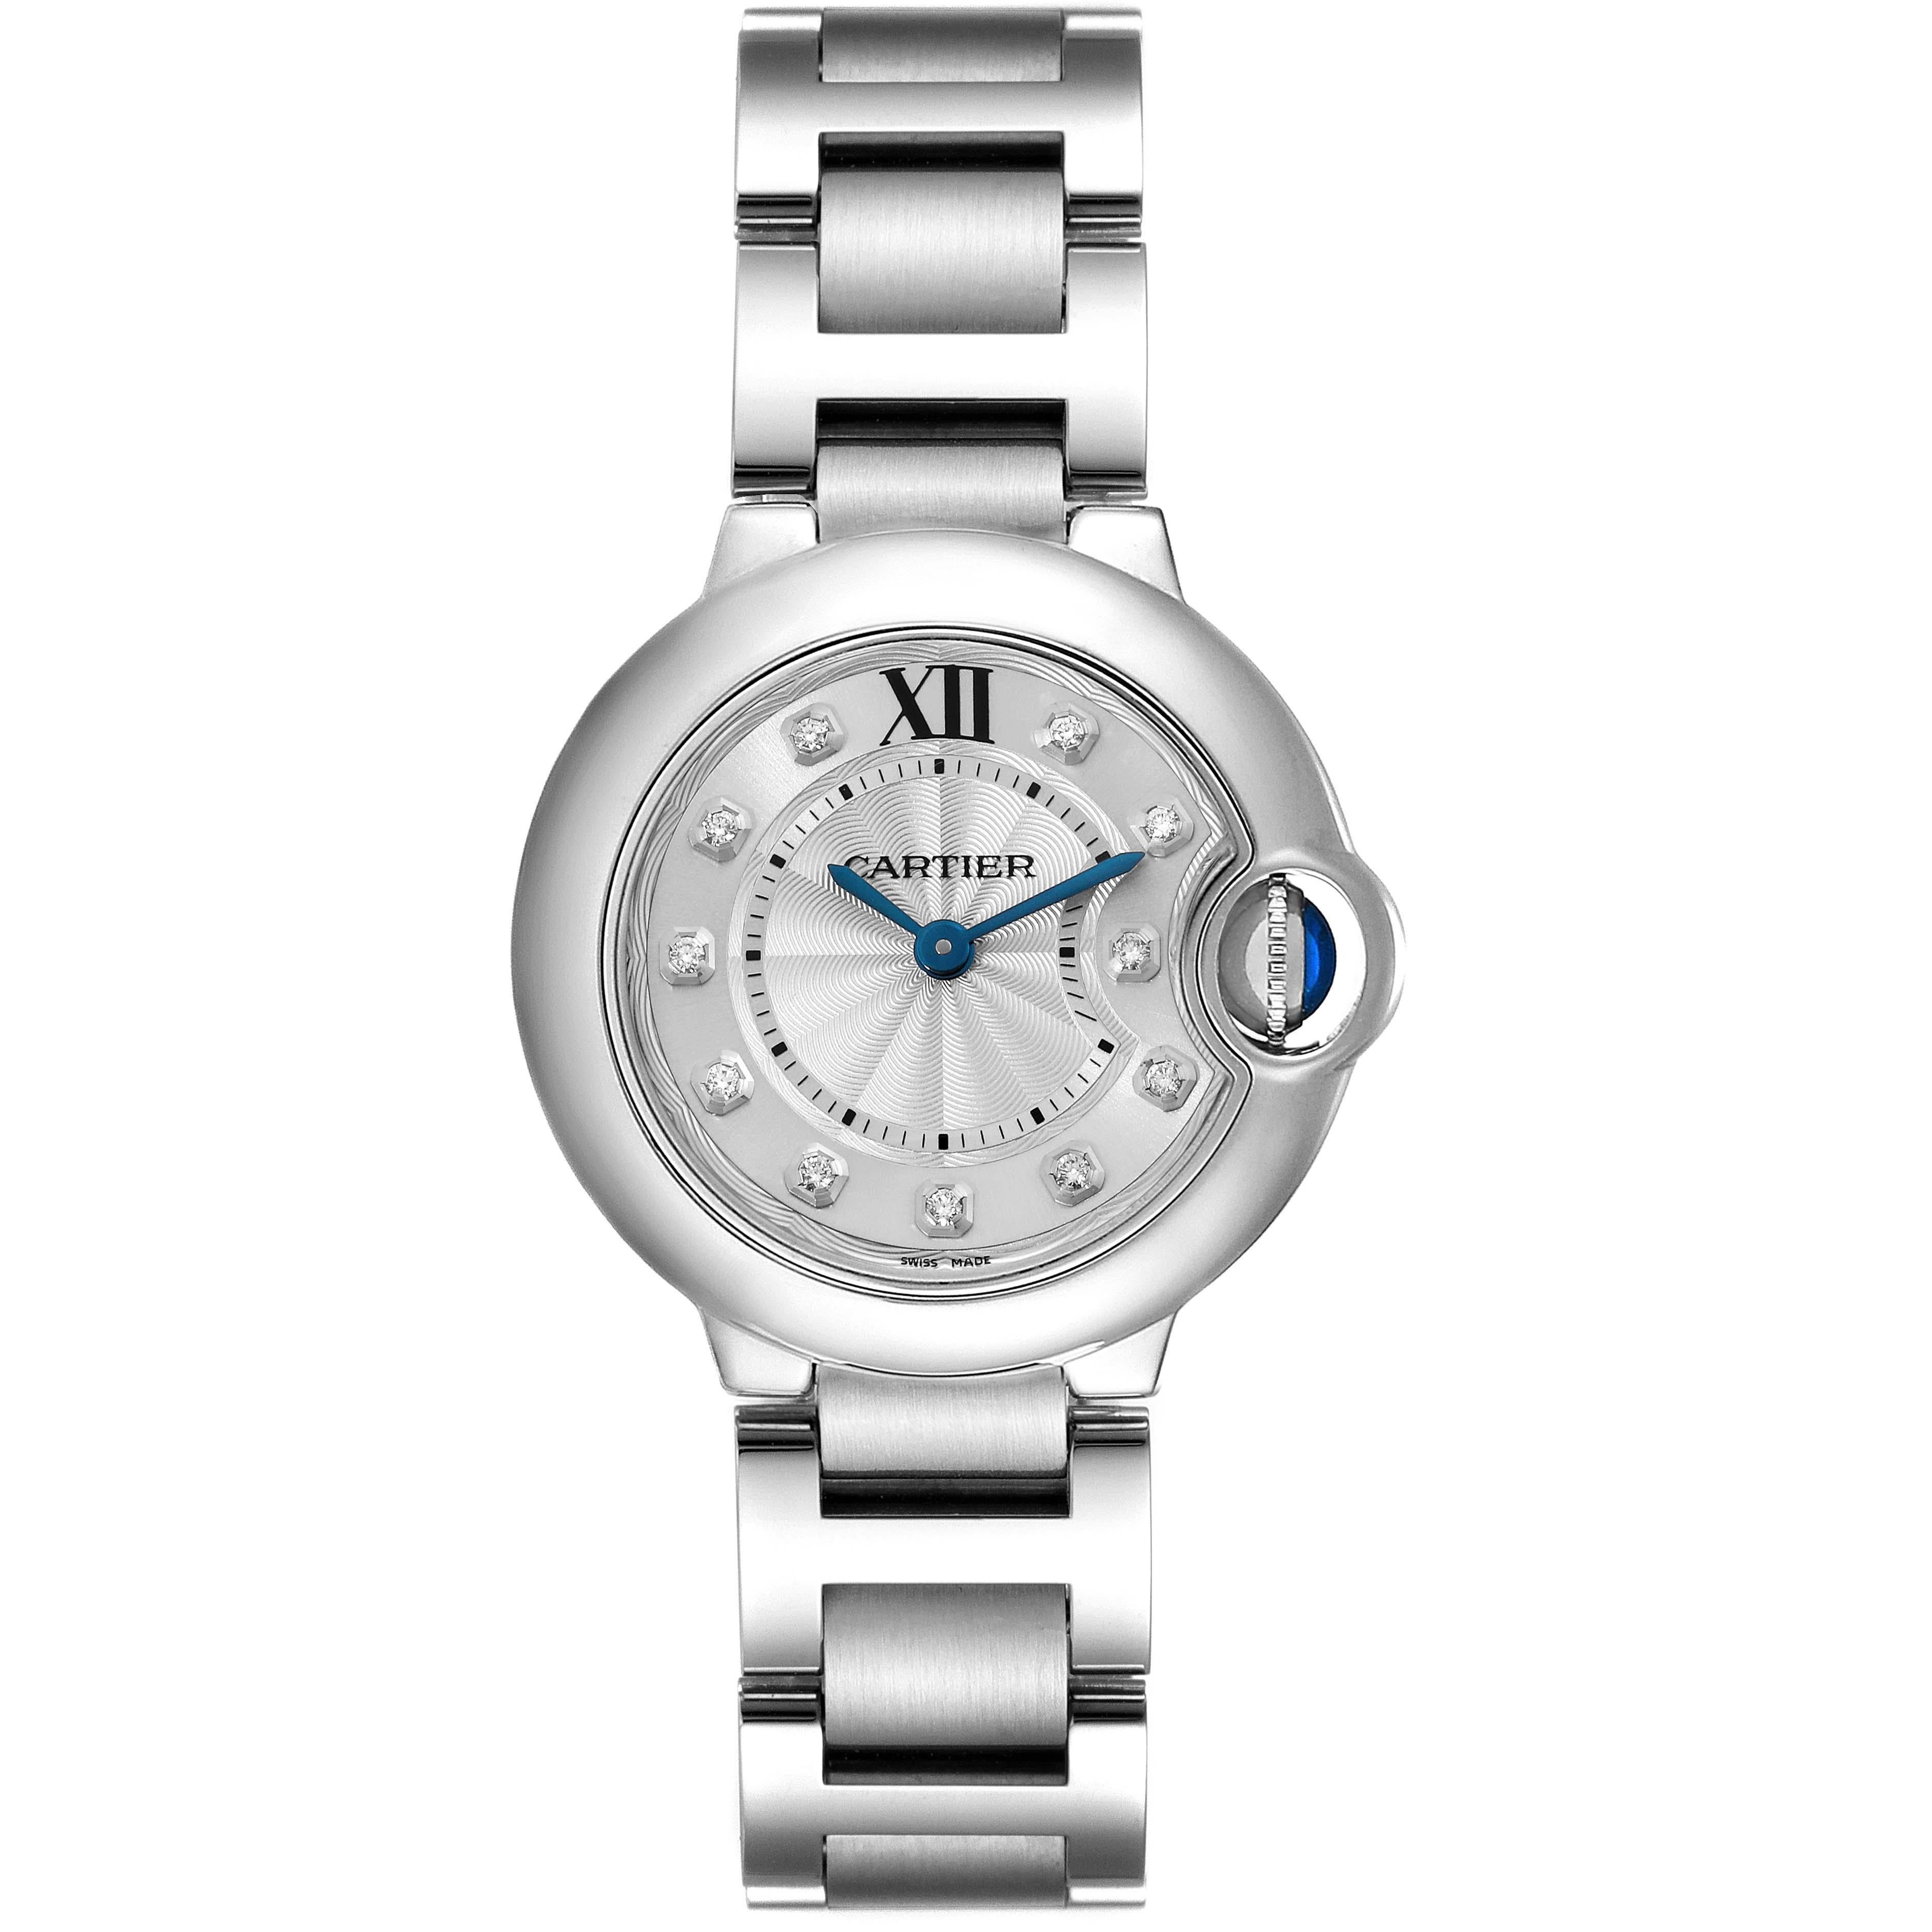 Cartier Ballon Bleu Silver Diamond Dial Steel Ladies Watch WE902073 Card. Quartz movement. Caliber 049. Round stainless steel case 29.0 mm in diameter. Fluted crown set with the blue spinel cabochon. Stainless steel smooth bezel. Scratch resistant